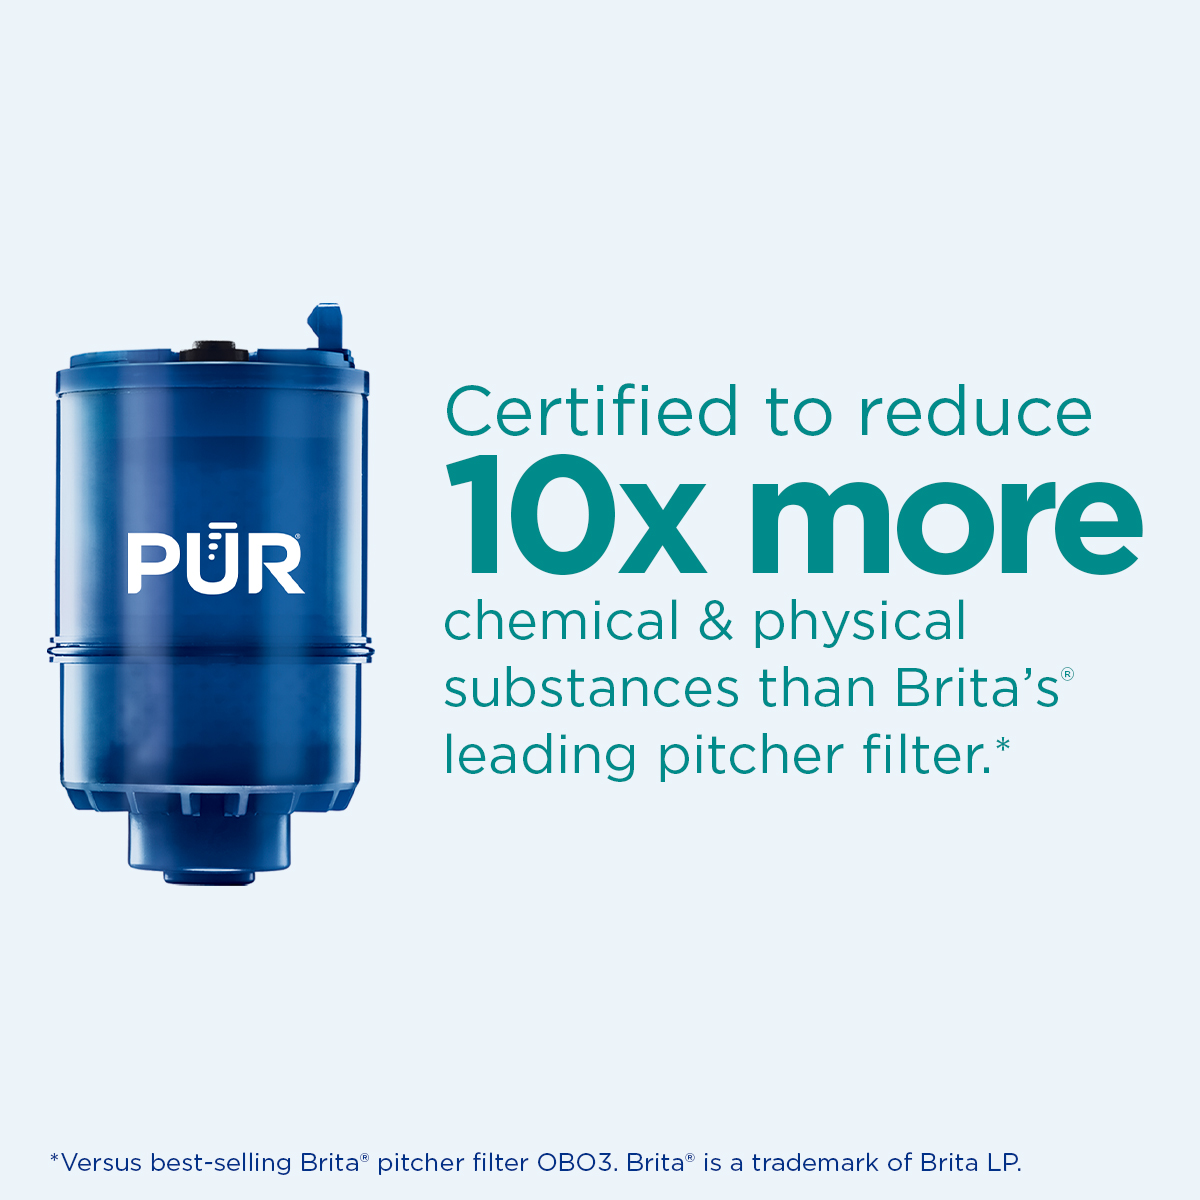 PUR PLUS Faucet Mount Water Replacement Filter 2-Pack, 6 Month Supply, RF9999-2 - image 4 of 10